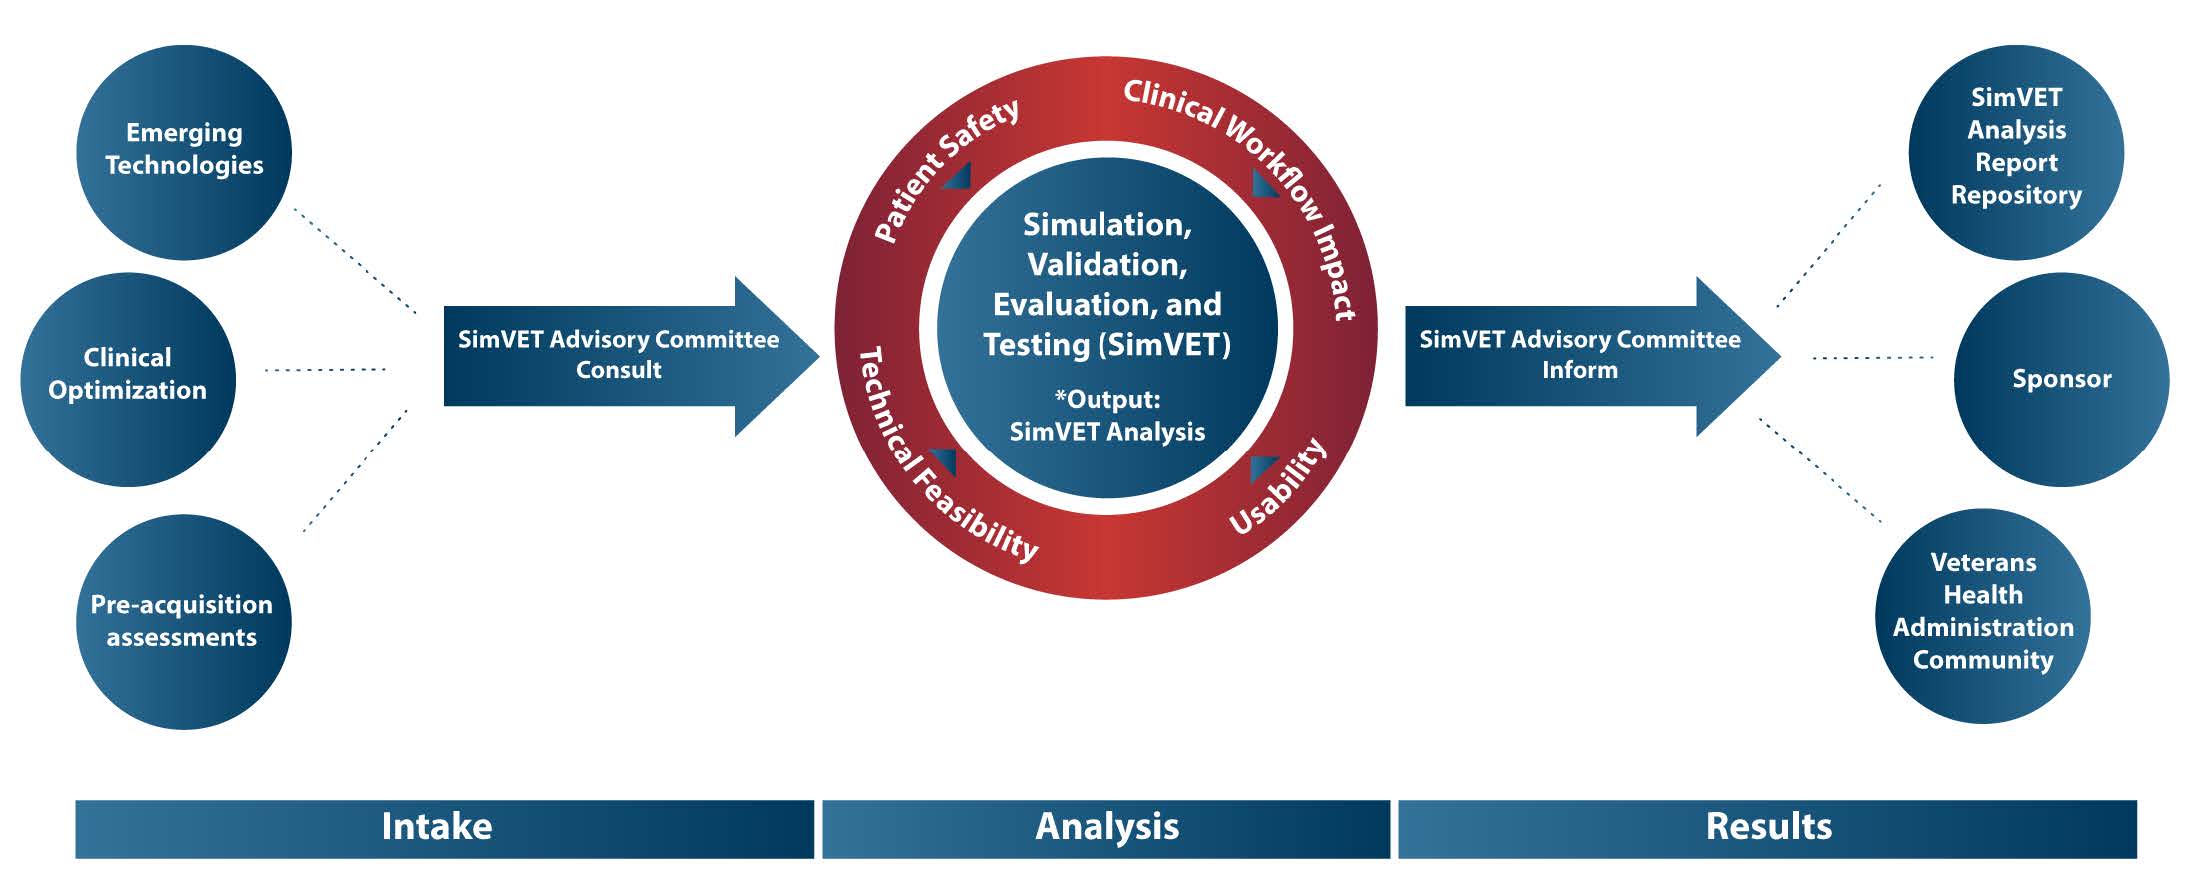 An infographic depicting a three phase process: Intake, Analysis, Results for SimVET’s approach to analysis. Emerging technologies, clinical optimization, and pre-acquision assessments are looked at my the SimVET Committee Consult. These then are selected and move into the SimVET program. The SimVET Advisory Committee then determines the results with either a SimVET analysis report repository, a sponsor for work, or informing the Veterans health administration community.
 
h